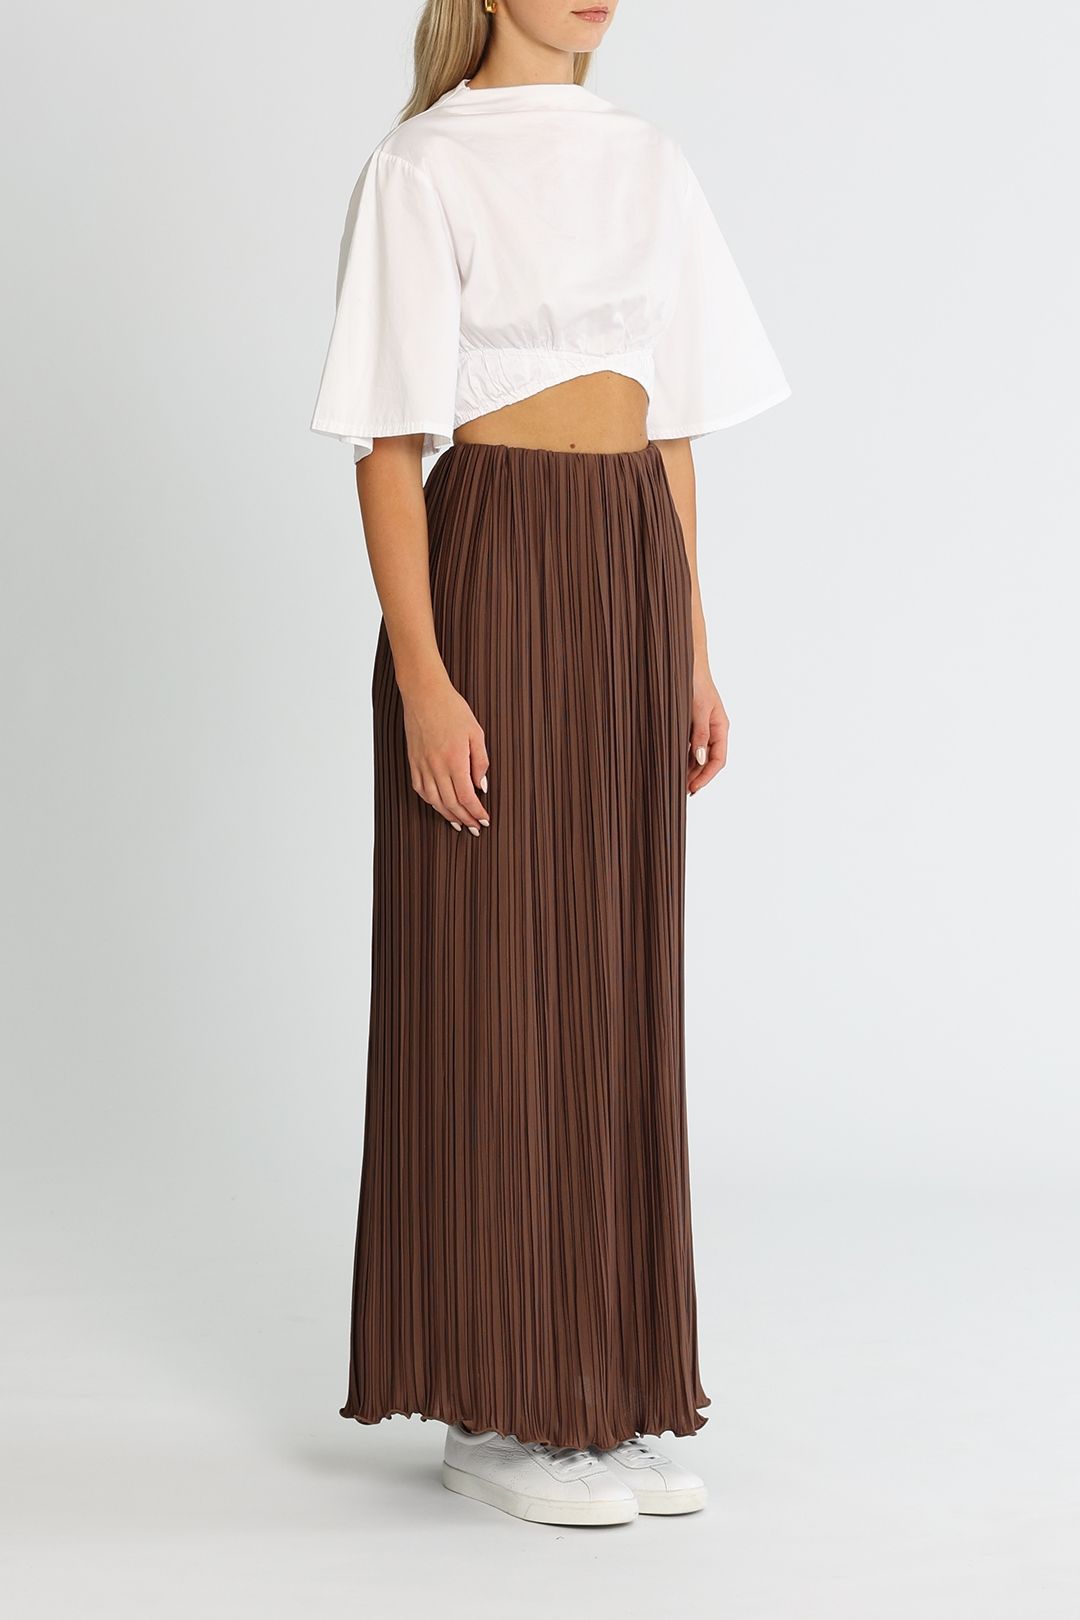 Significant Other Adeline Skirt Chocolate Maxi